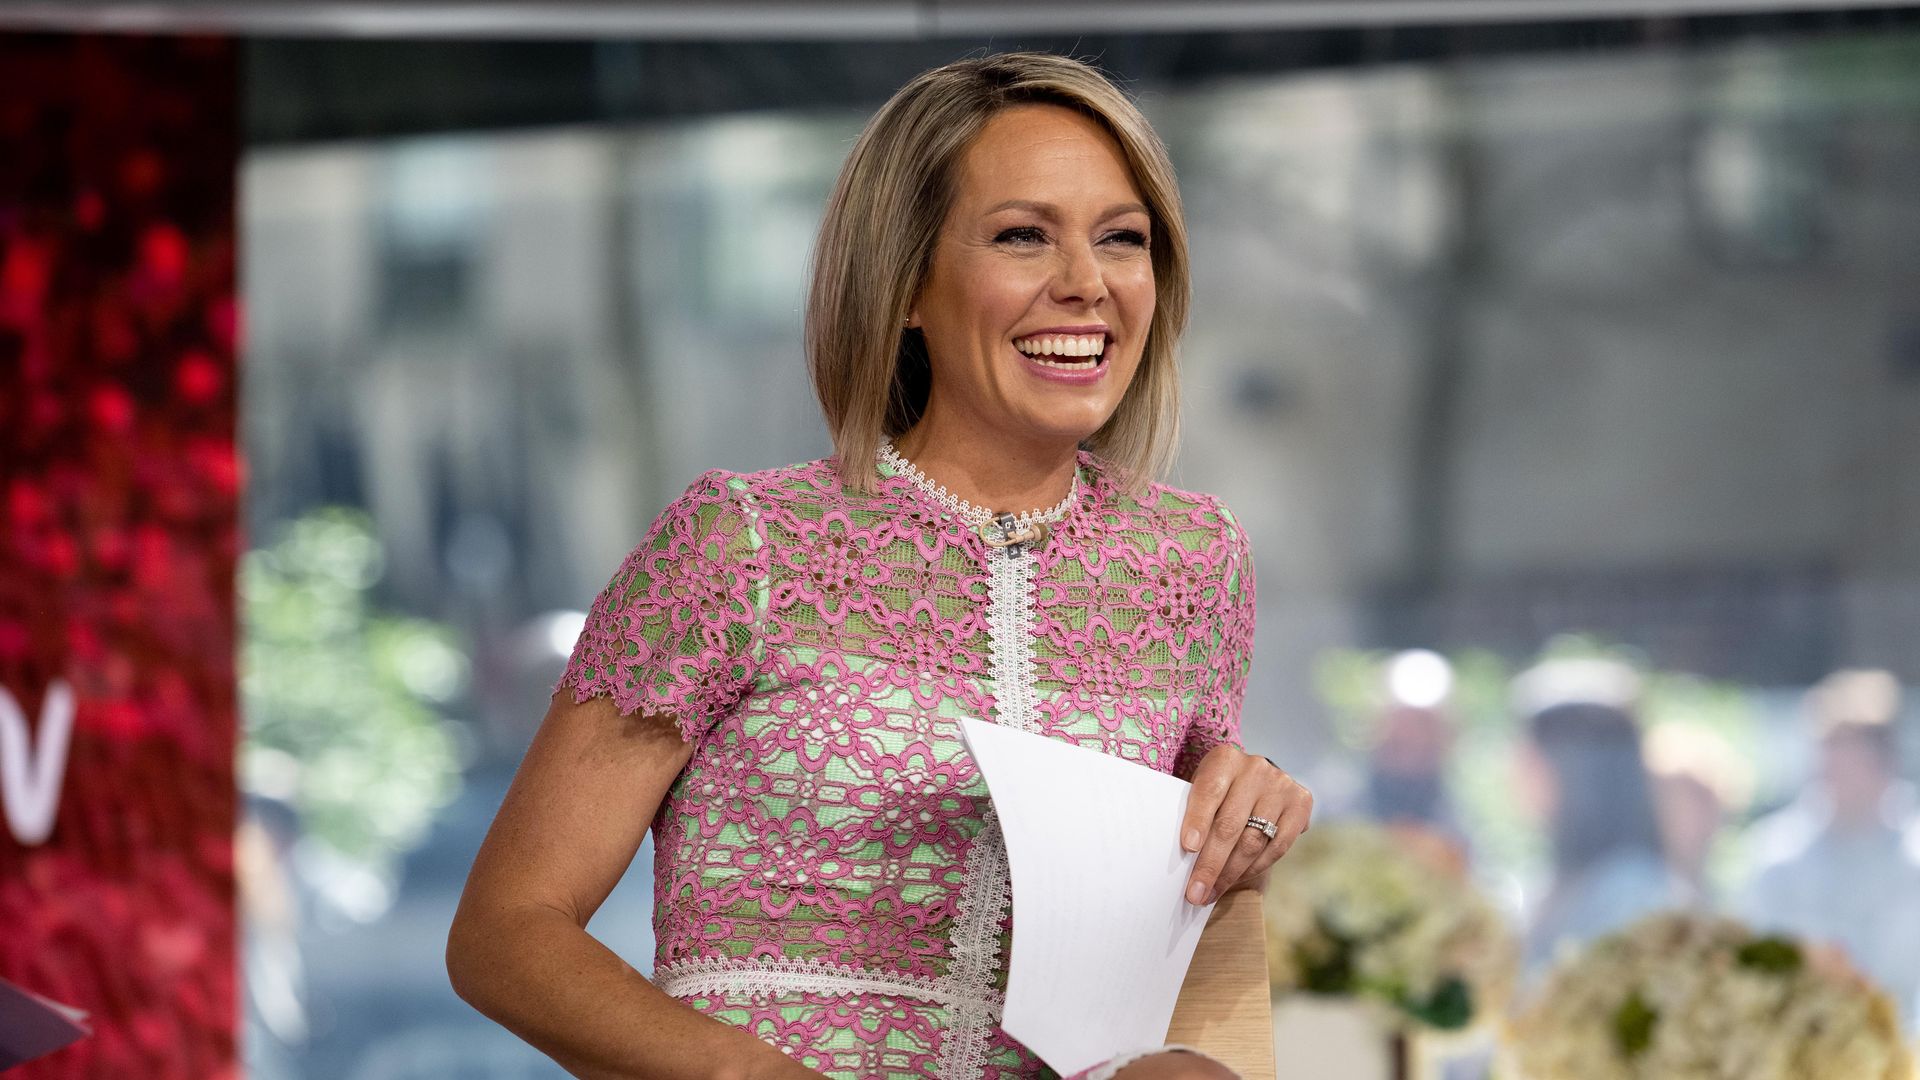 Dylan Dreyer on Today Show